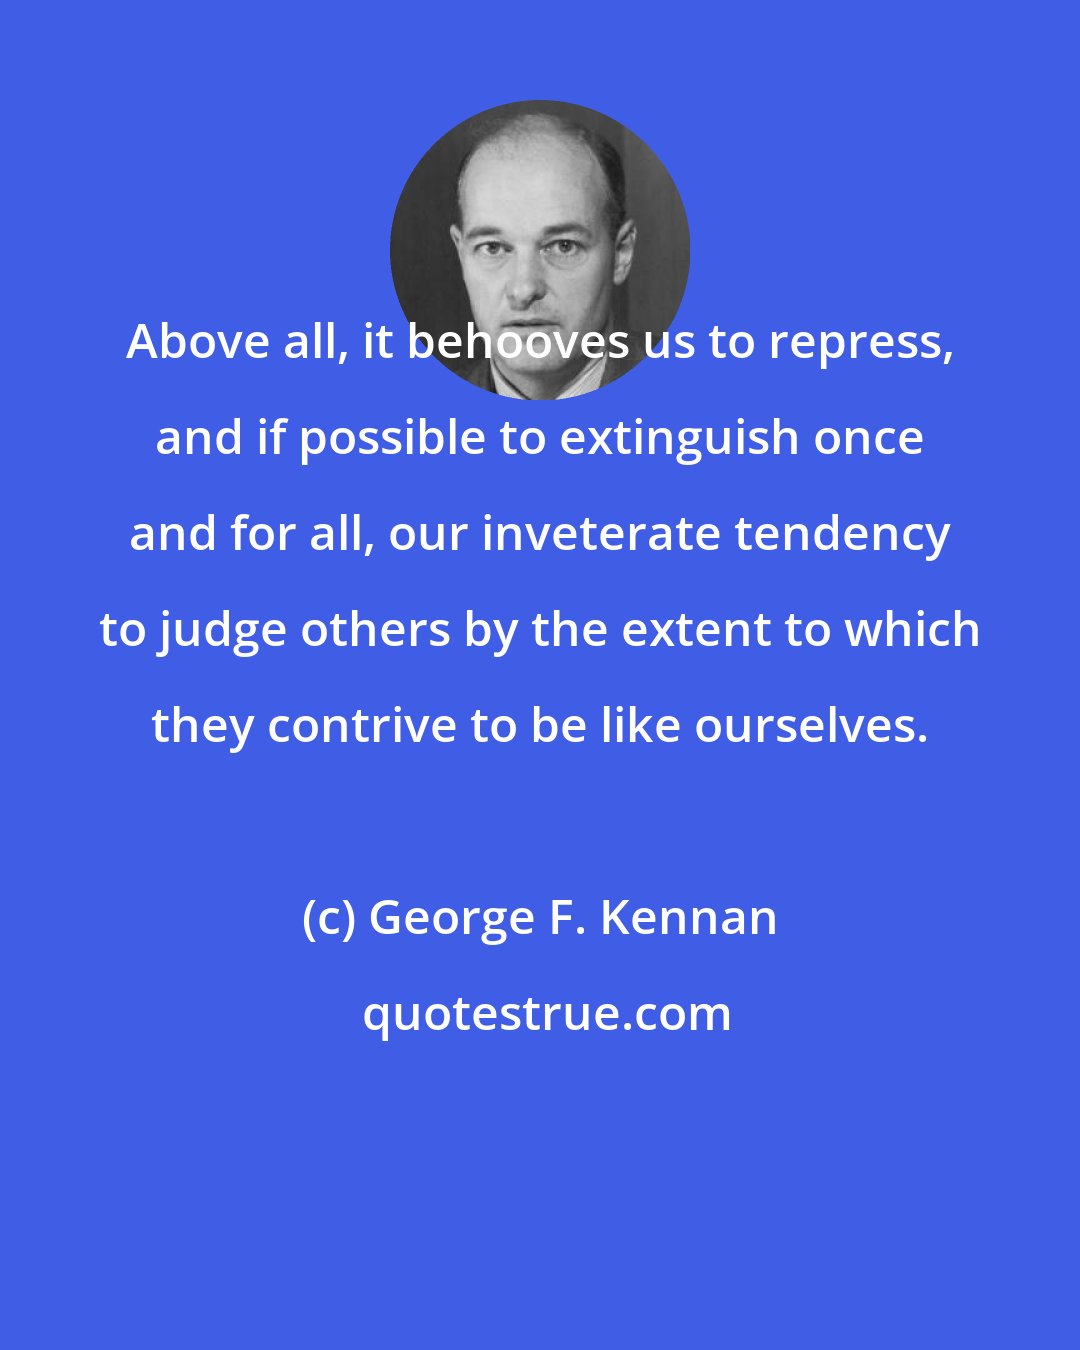 George F. Kennan: Above all, it behooves us to repress, and if possible to extinguish once and for all, our inveterate tendency to judge others by the extent to which they contrive to be like ourselves.